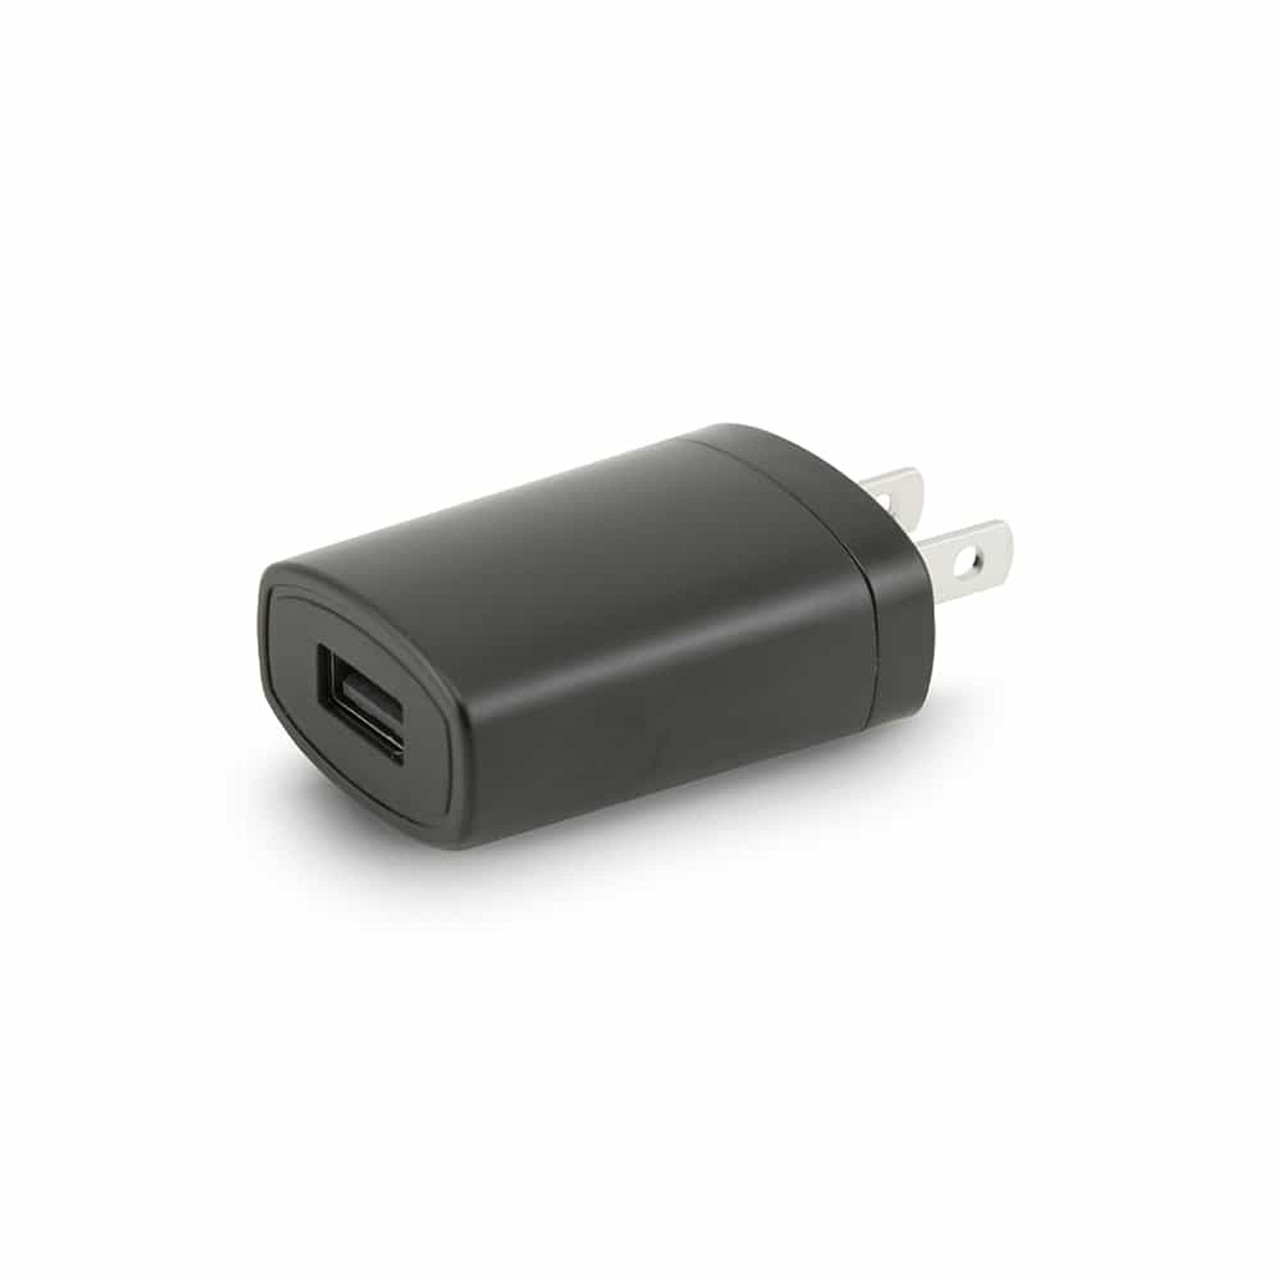 AC WORKS AC Connectors Household USB 5-Volt and 1 Amp Charger AD227-40 -  The Home Depot